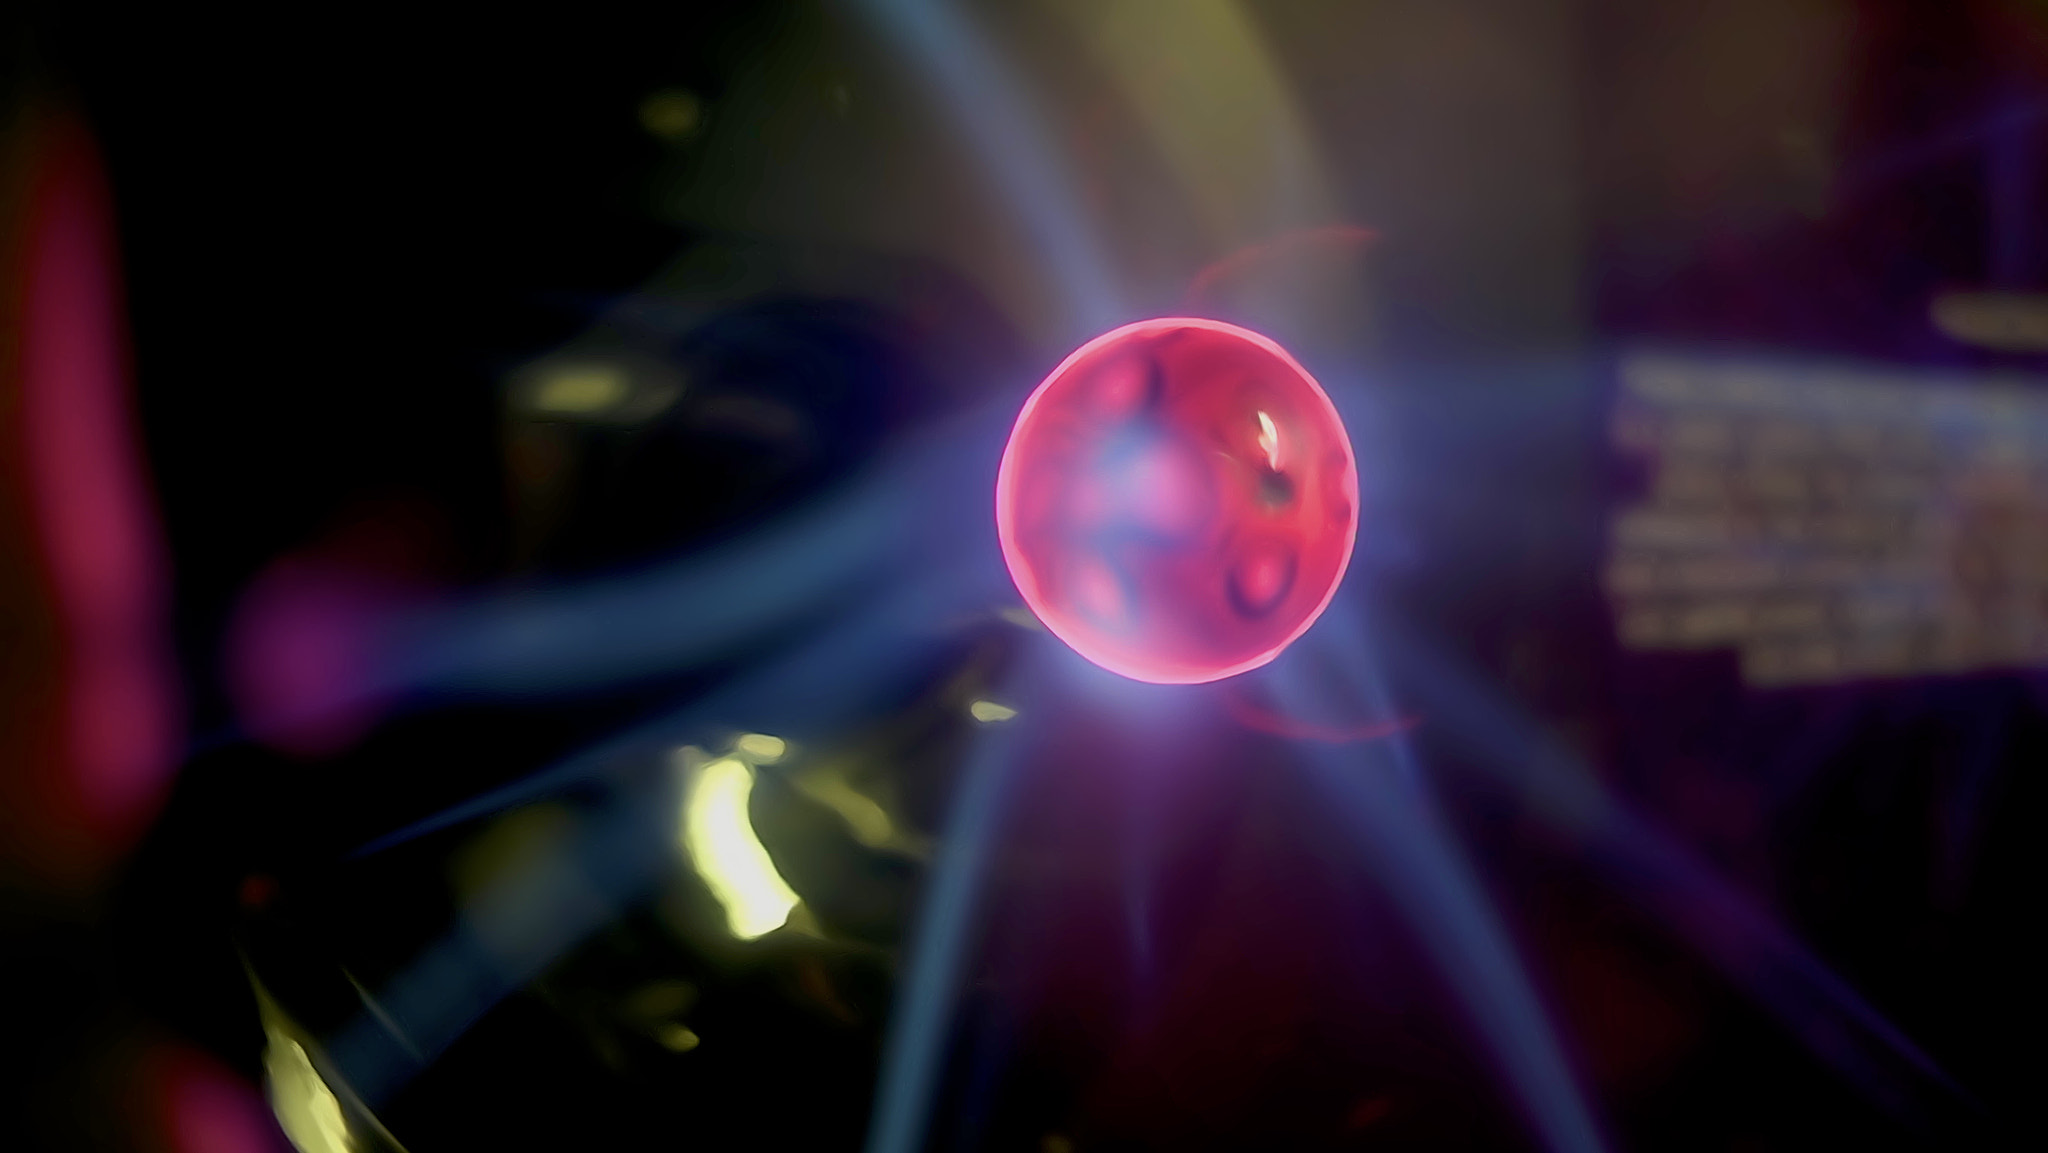 The Magnetohydrodynamic Effect of the Orb